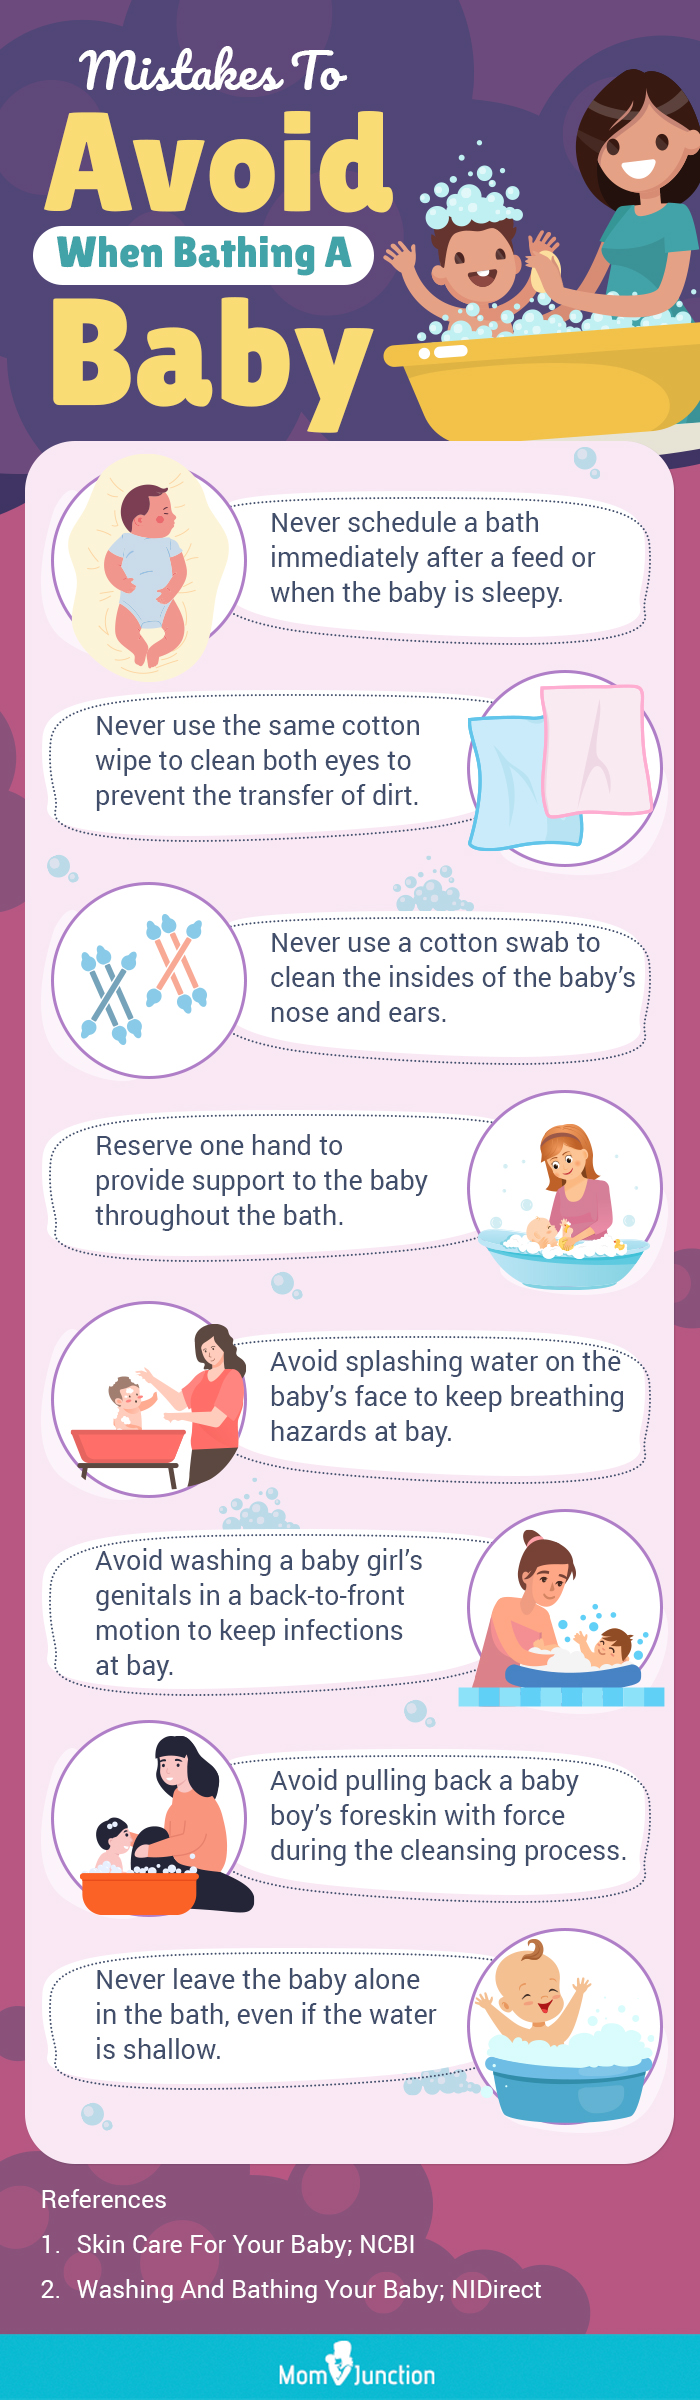 Mistakes-To-Avoid-When-Bathing-A-Baby (infographic)